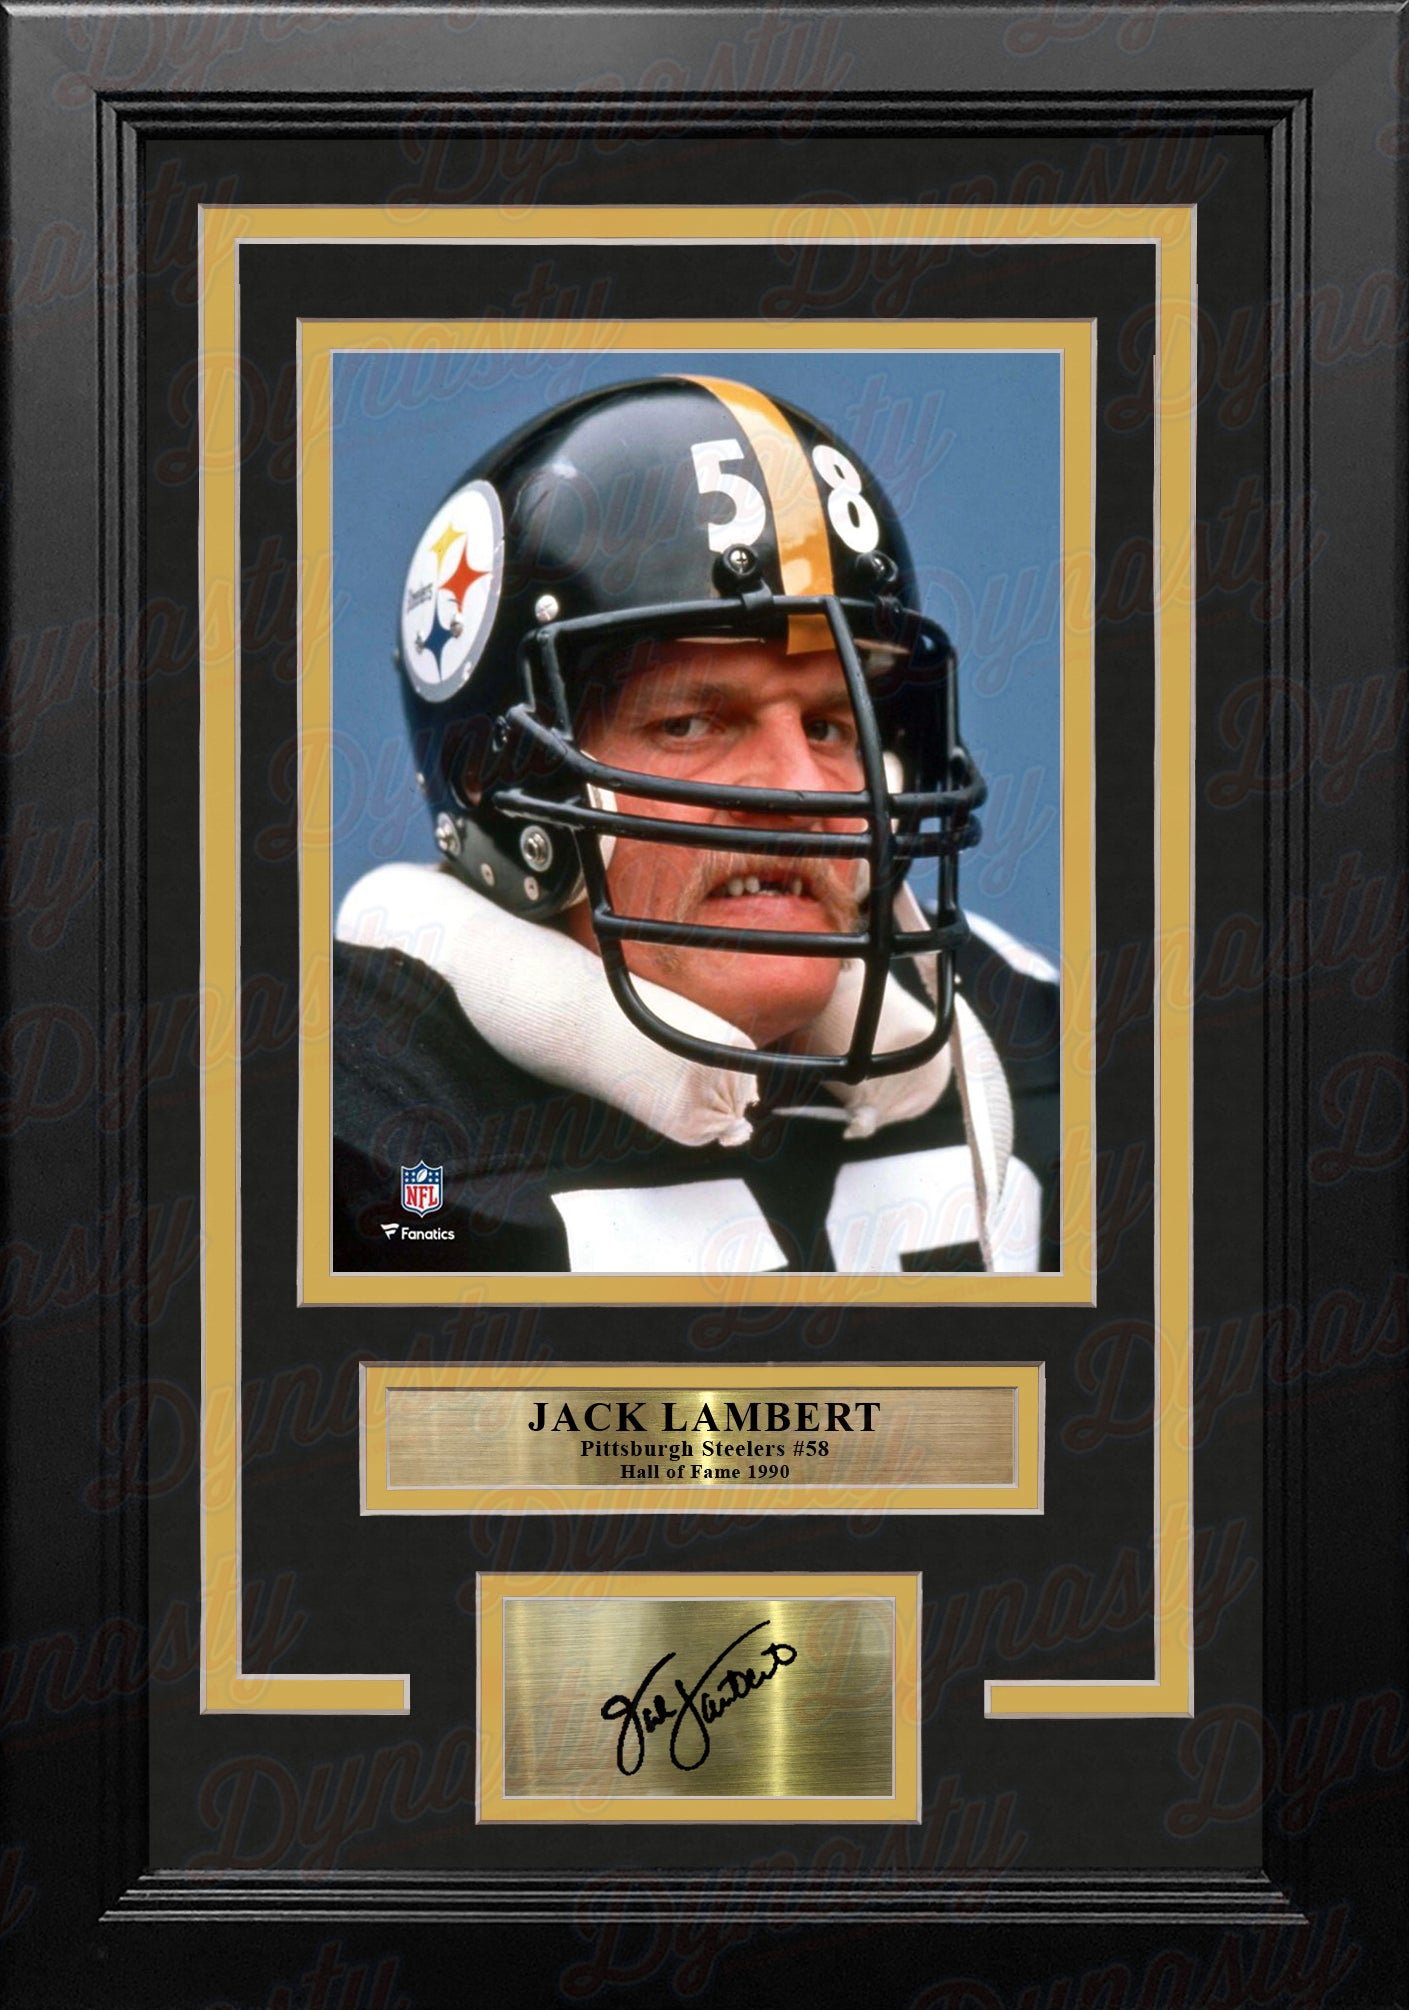 Jack Lambert Snarl Pittsburgh Steelers 8" x 10" Framed Football Photo with Engraved Autograph - Dynasty Sports & Framing 